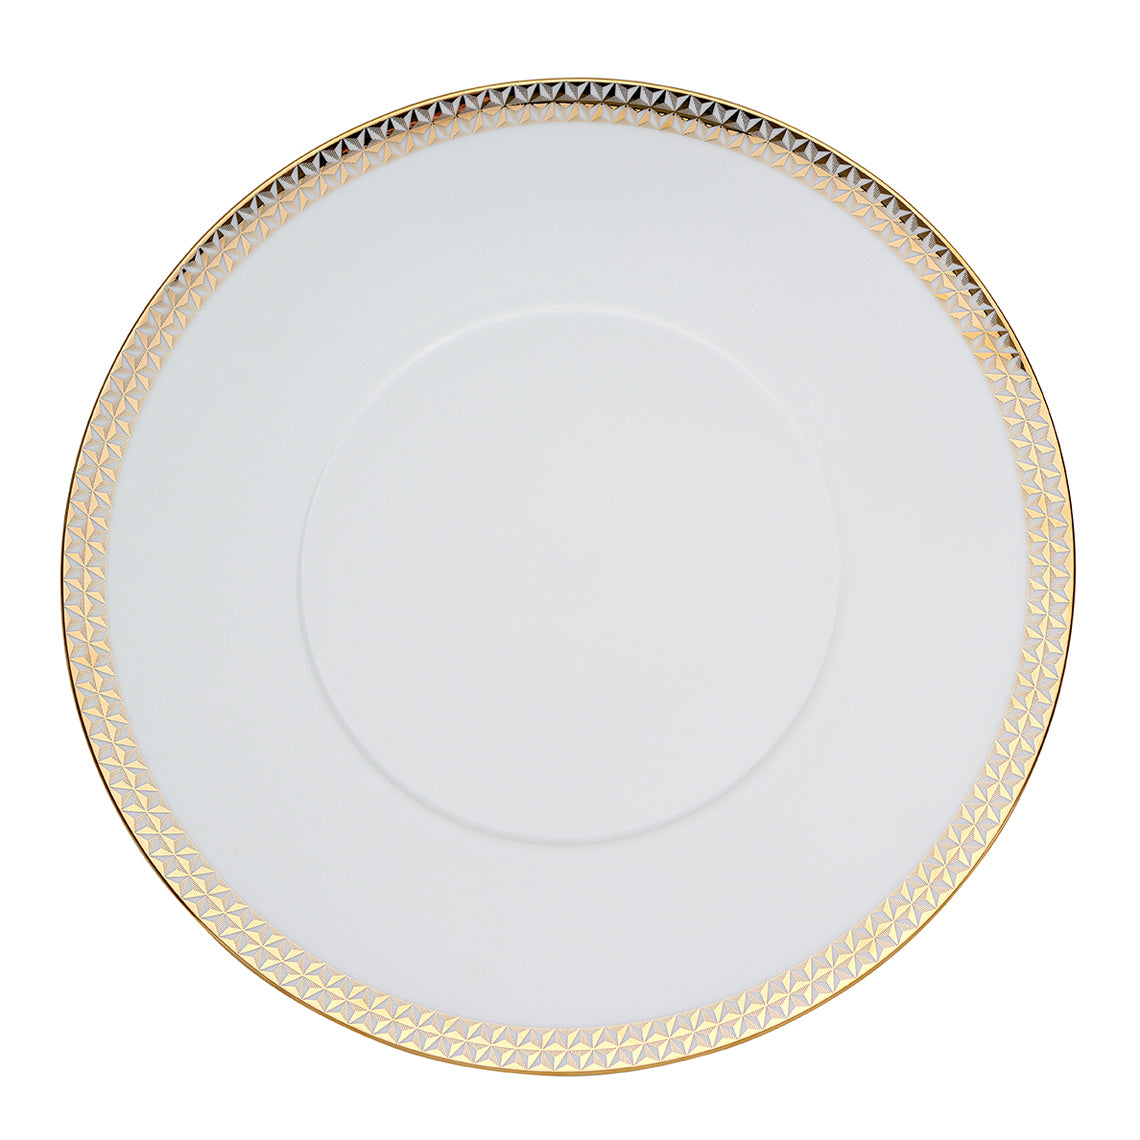 Gem Cut Gold Charger Plate White Background Photo